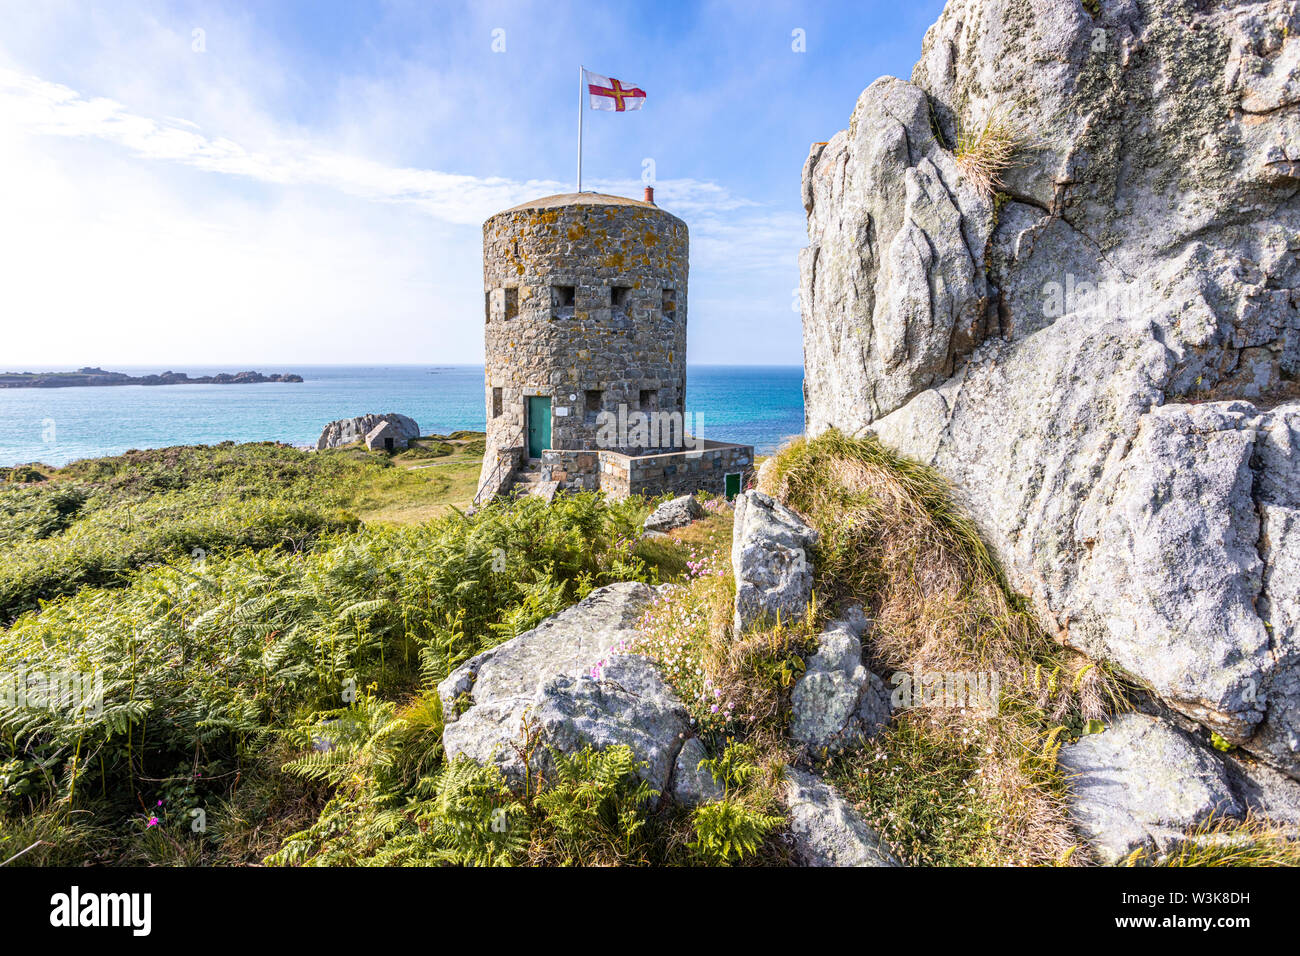 The Guernsey flag flying over Loophole Tower No 5 L'Ancresse (Nid de l'Herbe, Vale), Guernsey, Channel Islands UK - Built around 1778 - 79. Stock Photo